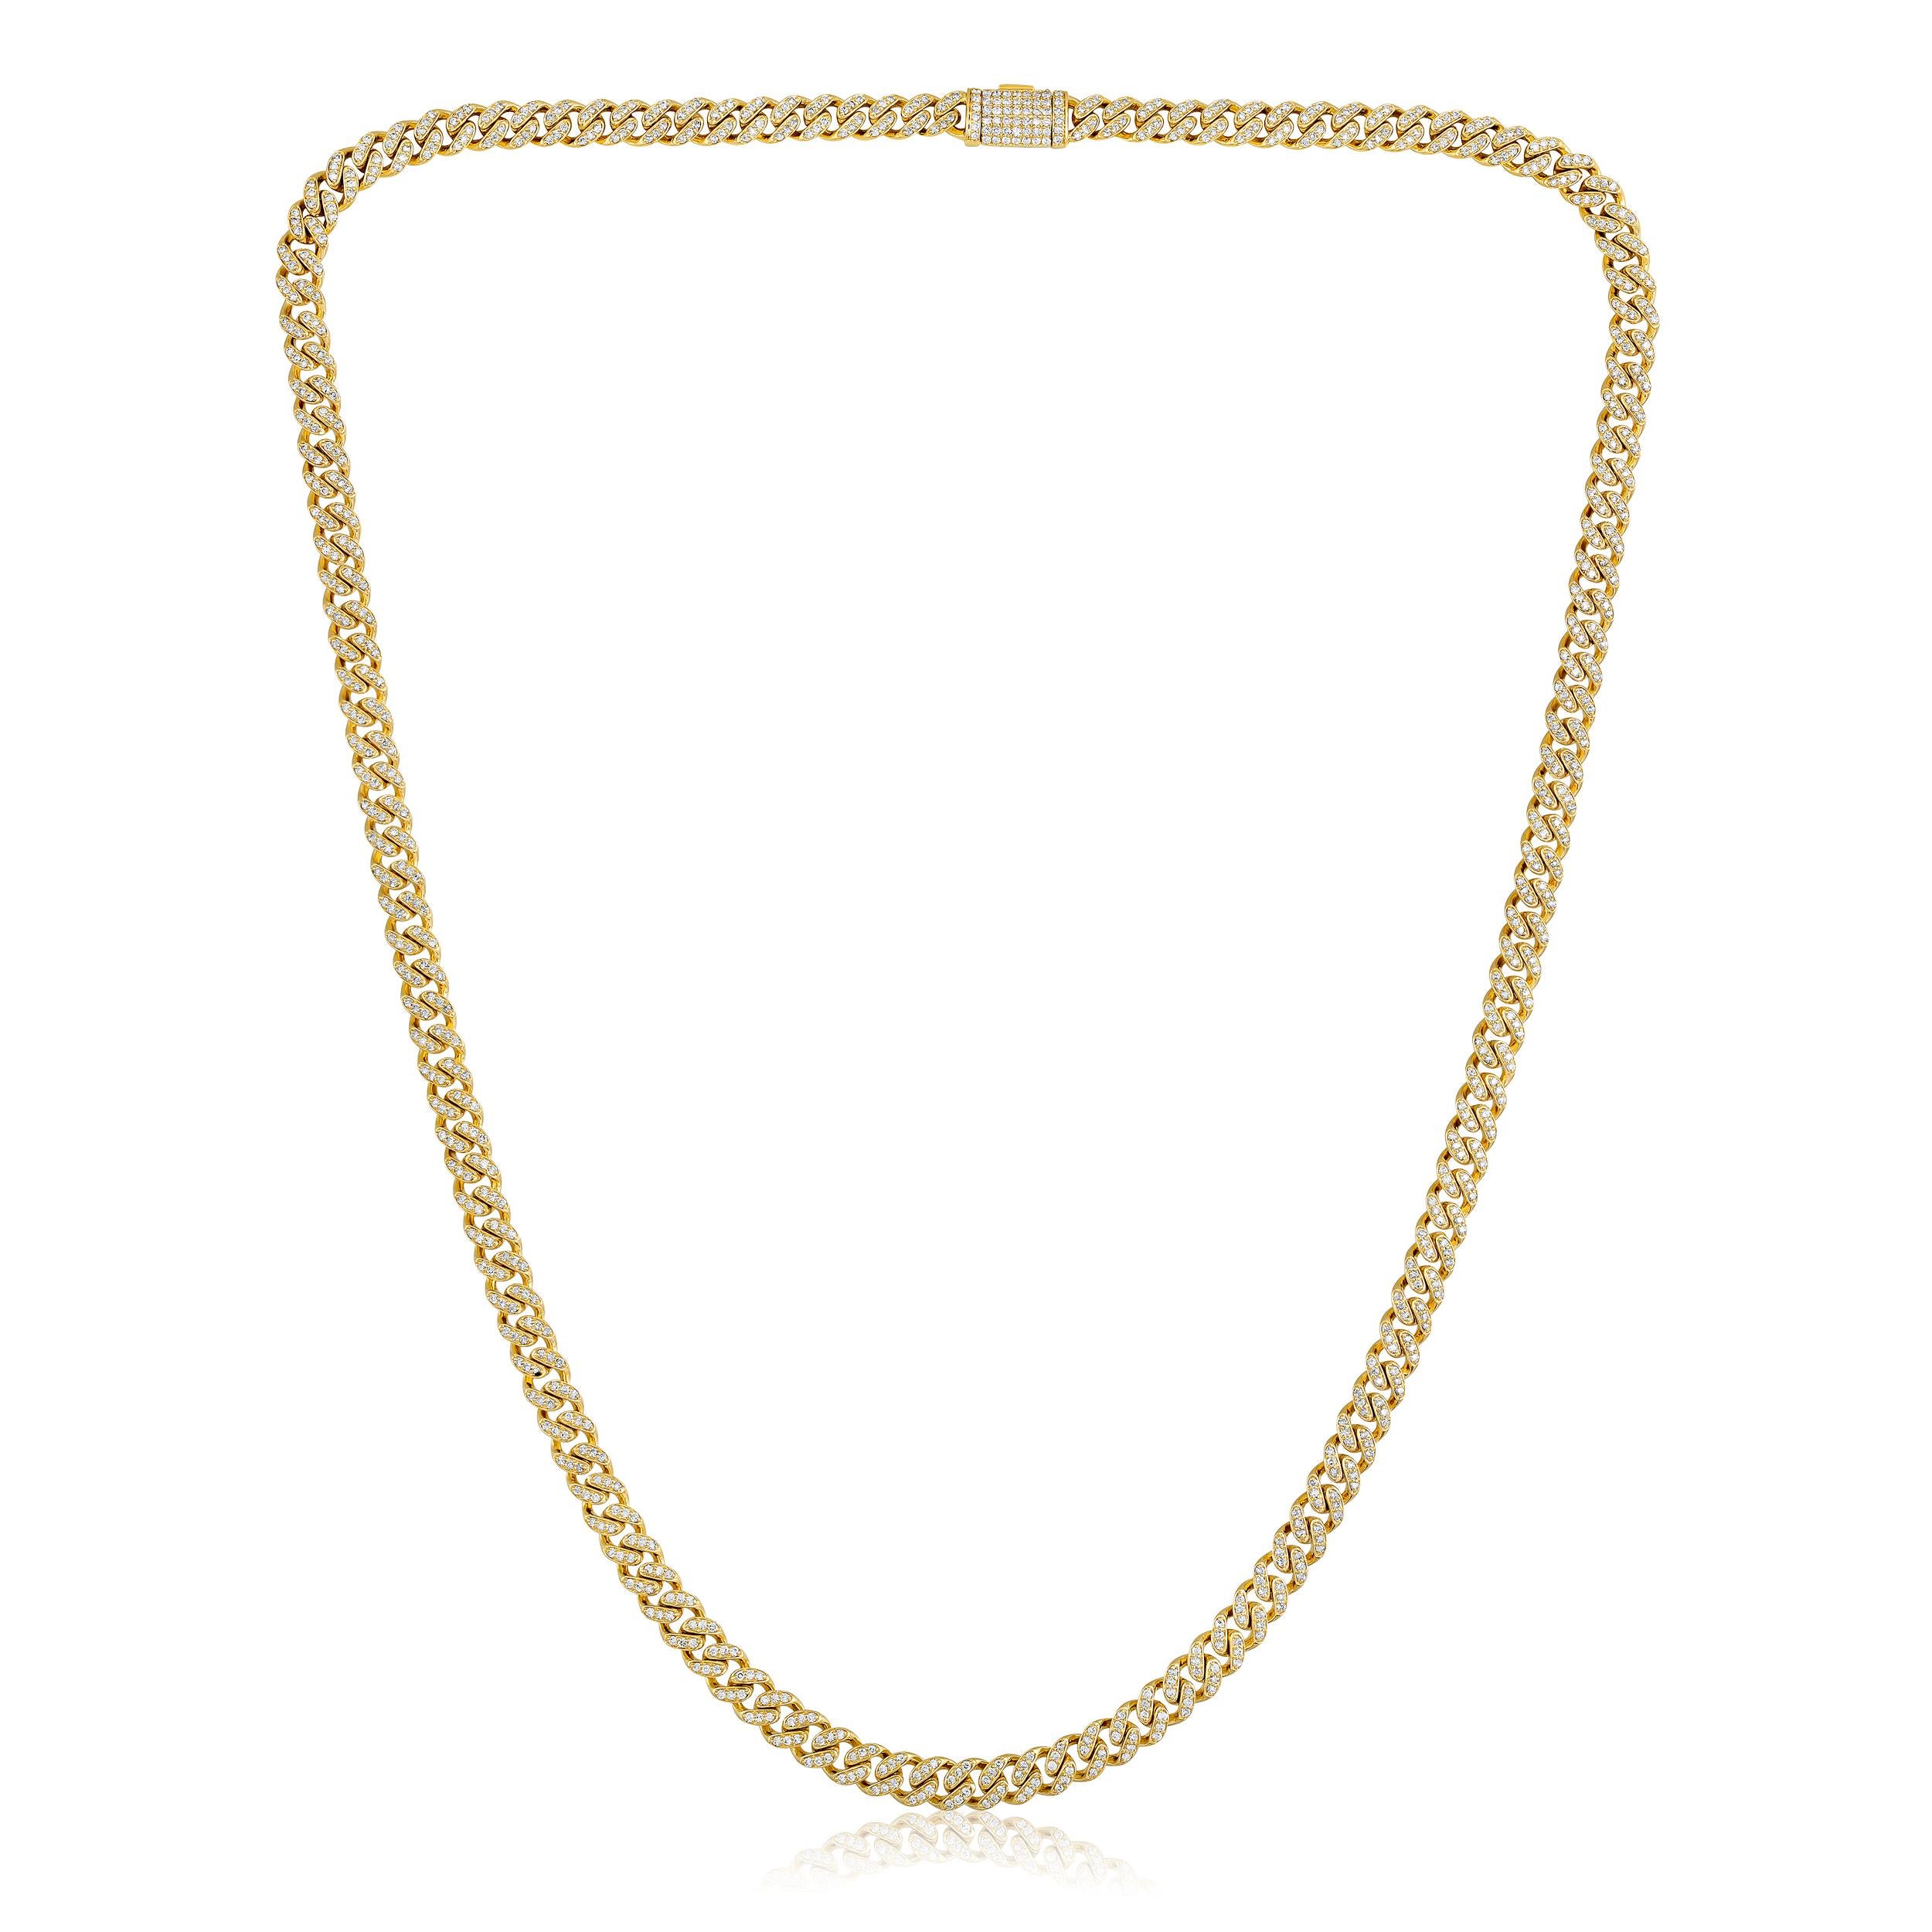 Crafted in 12.29 grams of 10K Yellow Gold, the necklace contains 930 stones of Round Diamonds with a total of 1.76 carat in F-G color and I1-I2 carat. The necklace length is 16 inches.

CONTEMPORARY AND TIMELESS ESSENCE: Crafted in 14-karat/18-karat